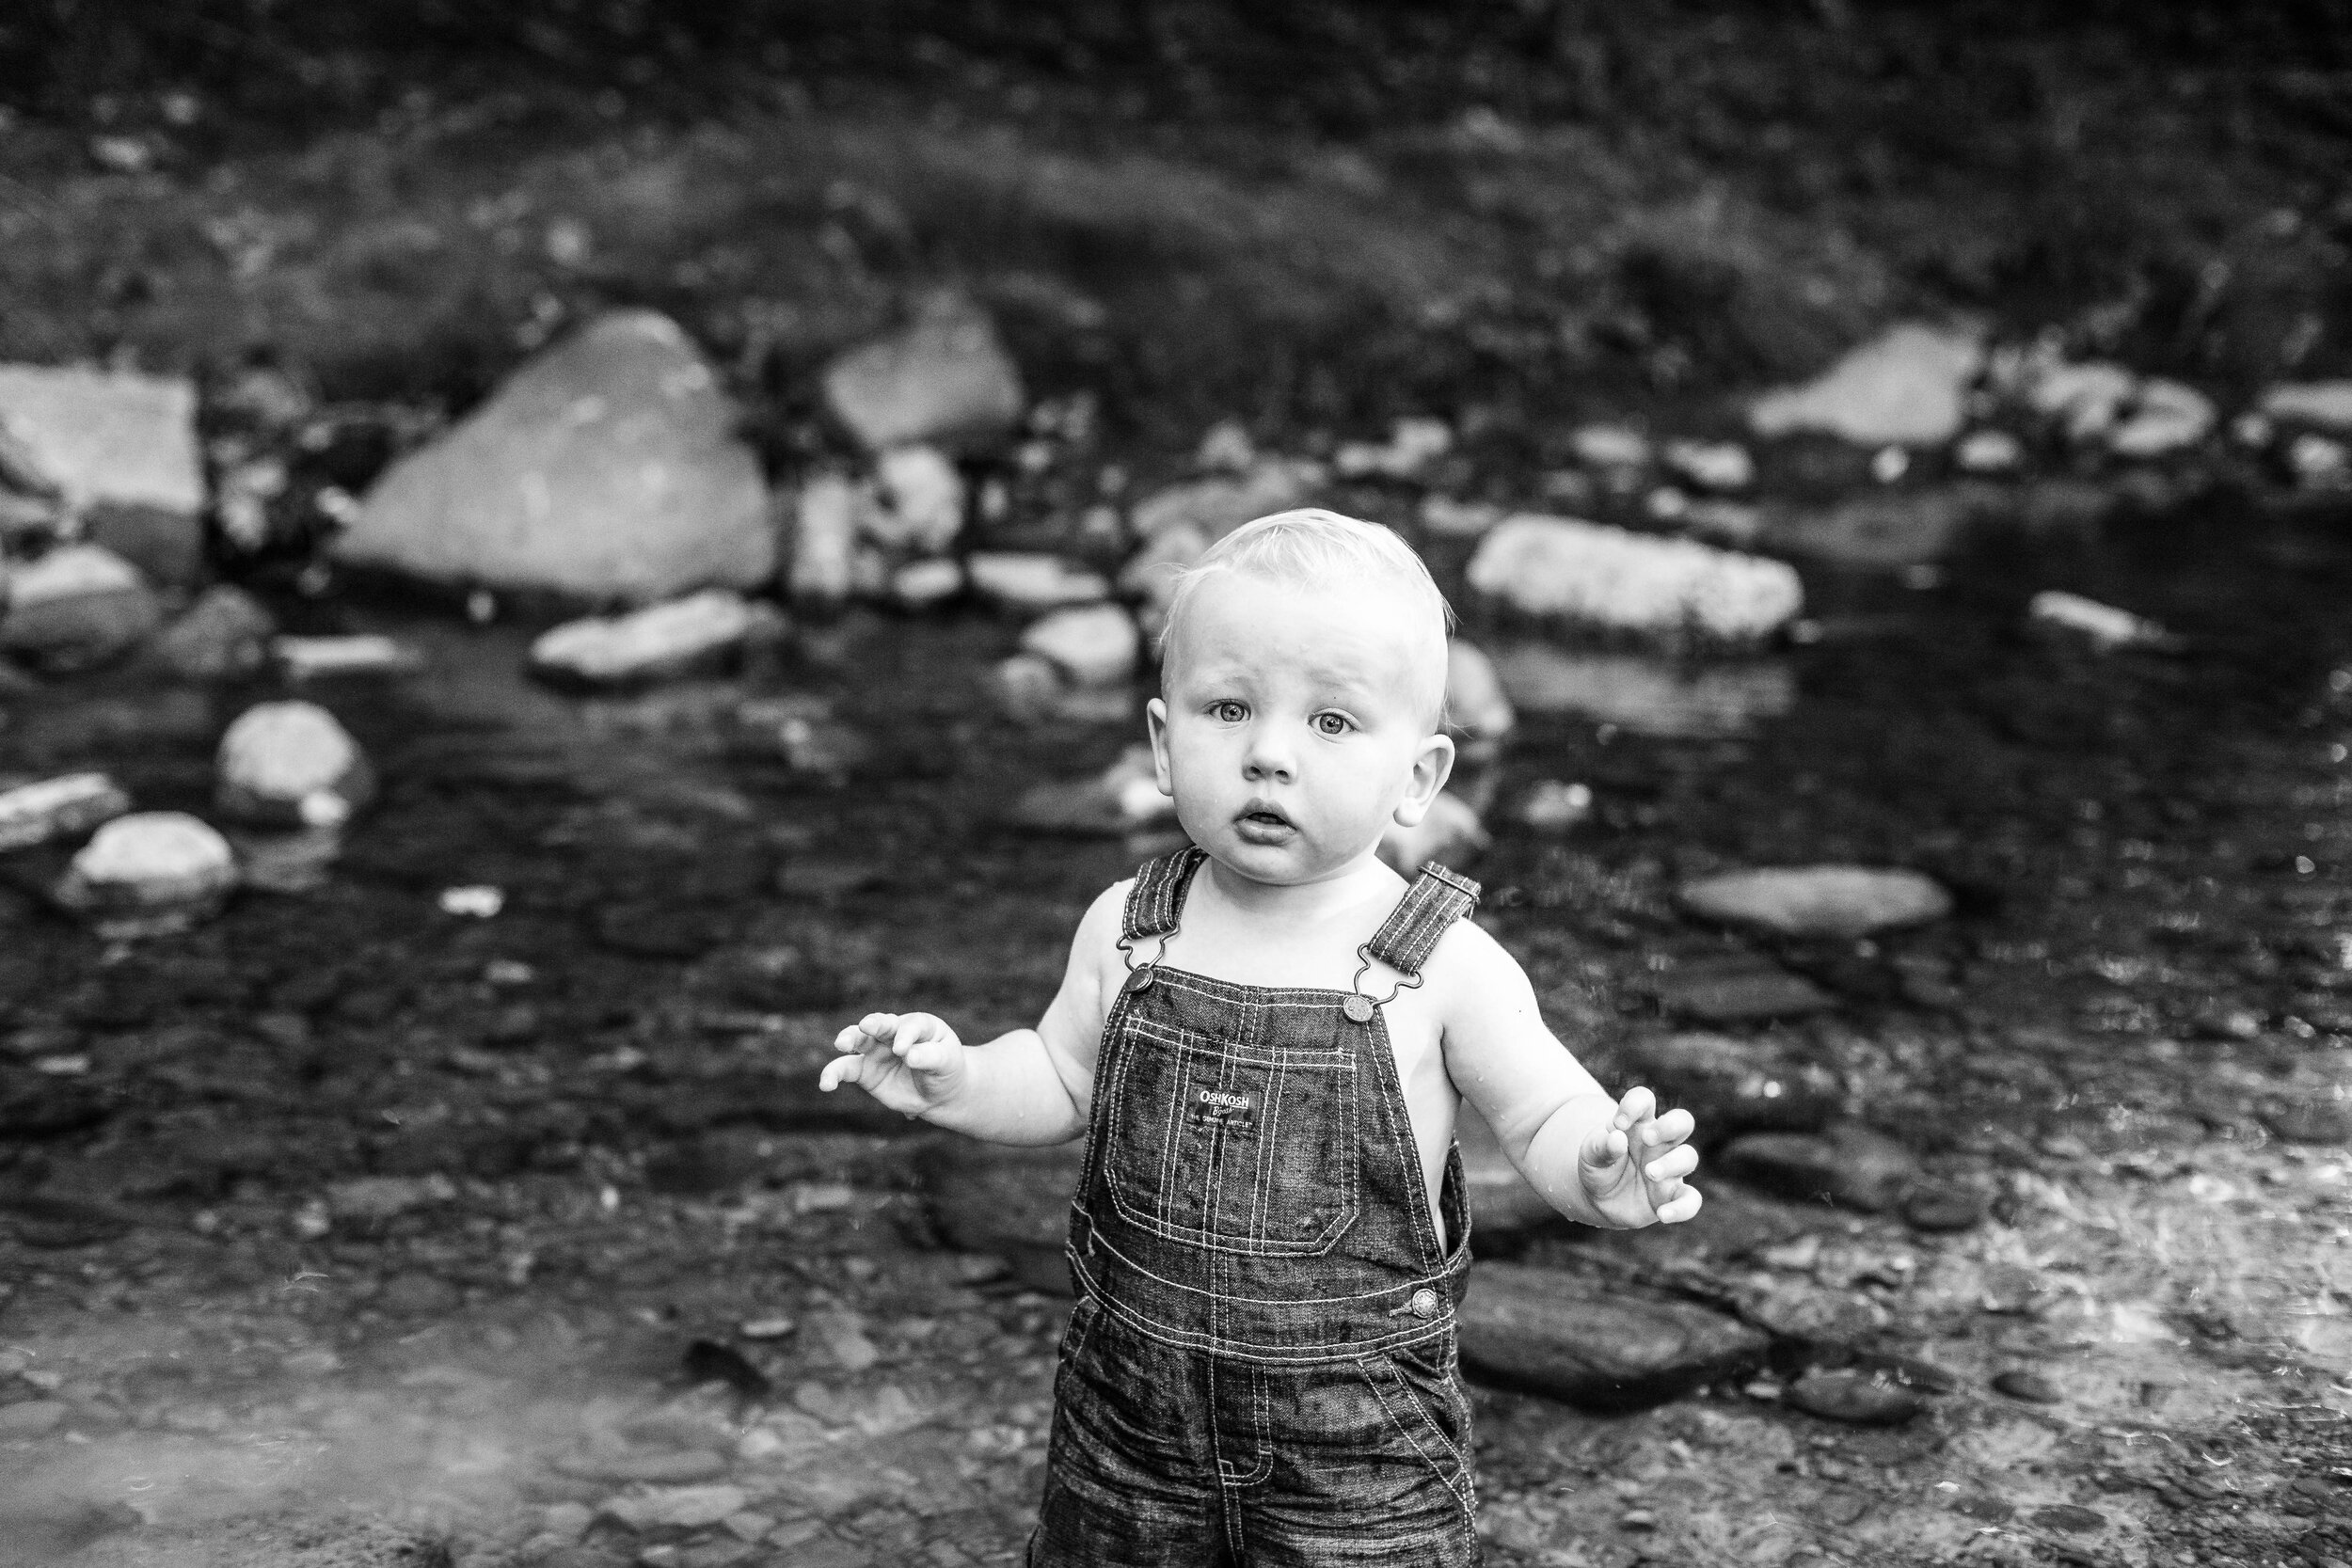  Baby photos in a creek wearing overalls 